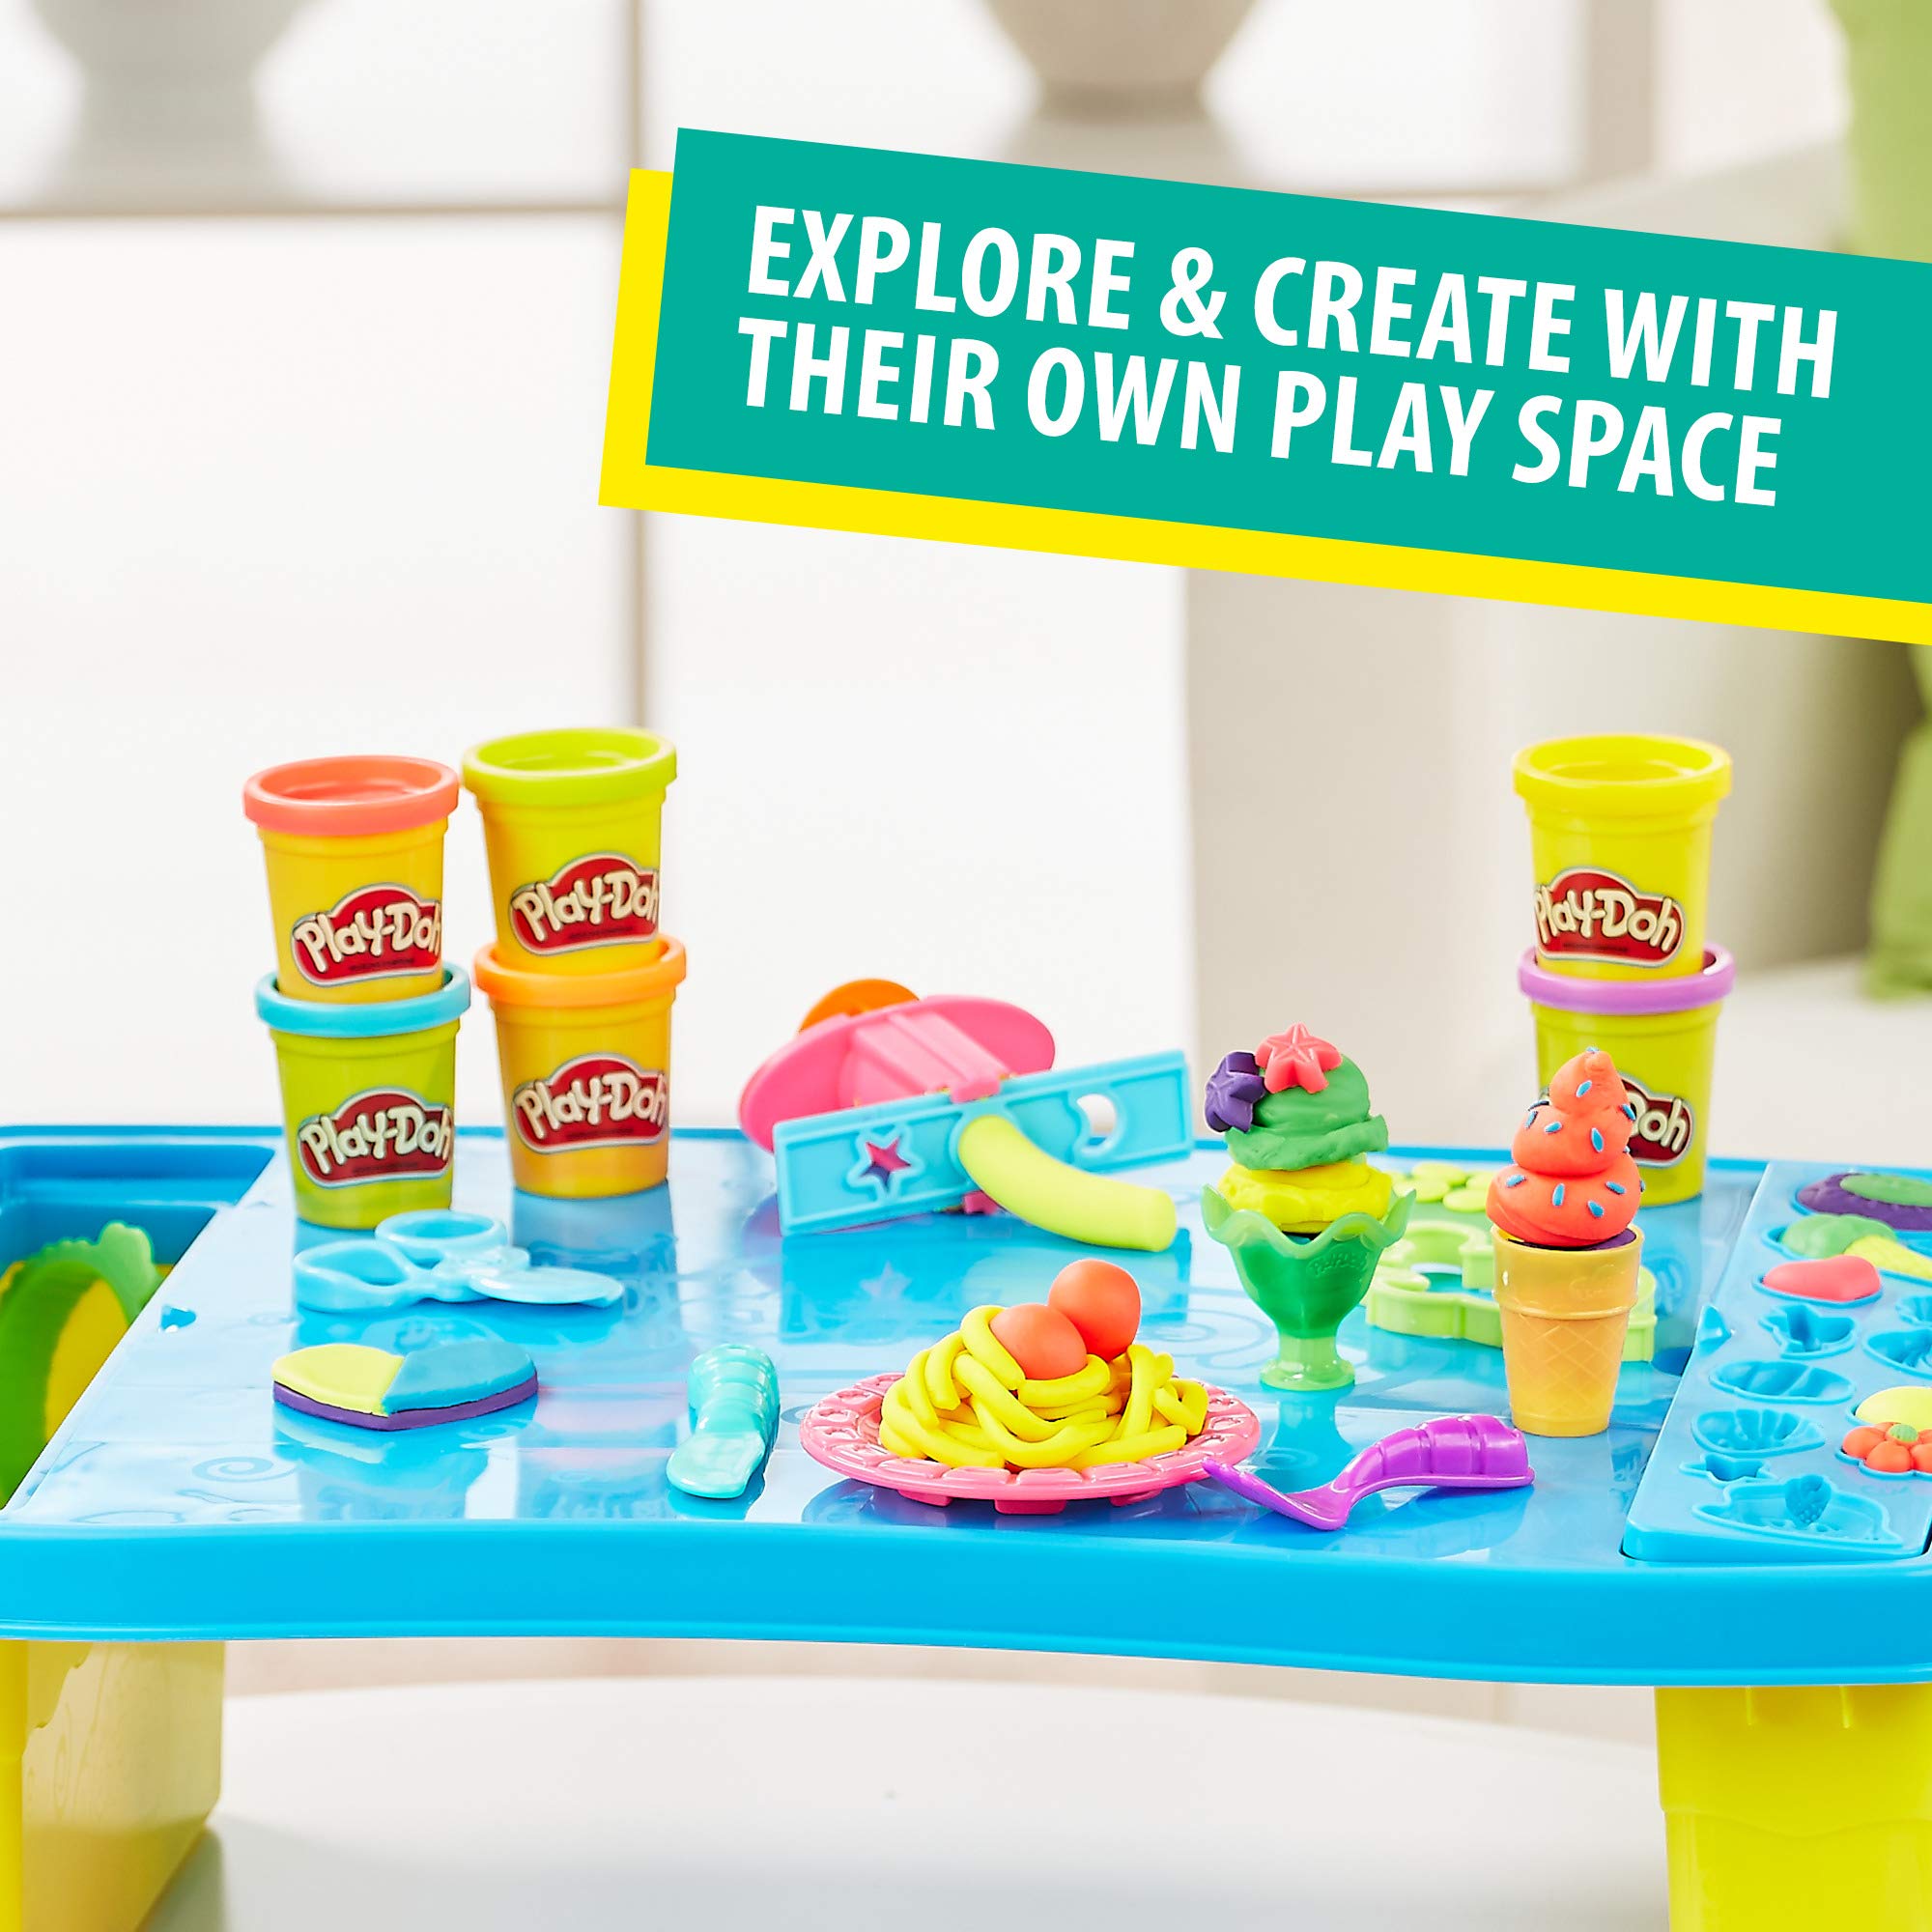 Play-Doh Play 'N Store Kids Table for Arts & Crafts Activities with 8 Non-Toxic Colors, 2 Oz Cans (Amazon Exclusive)